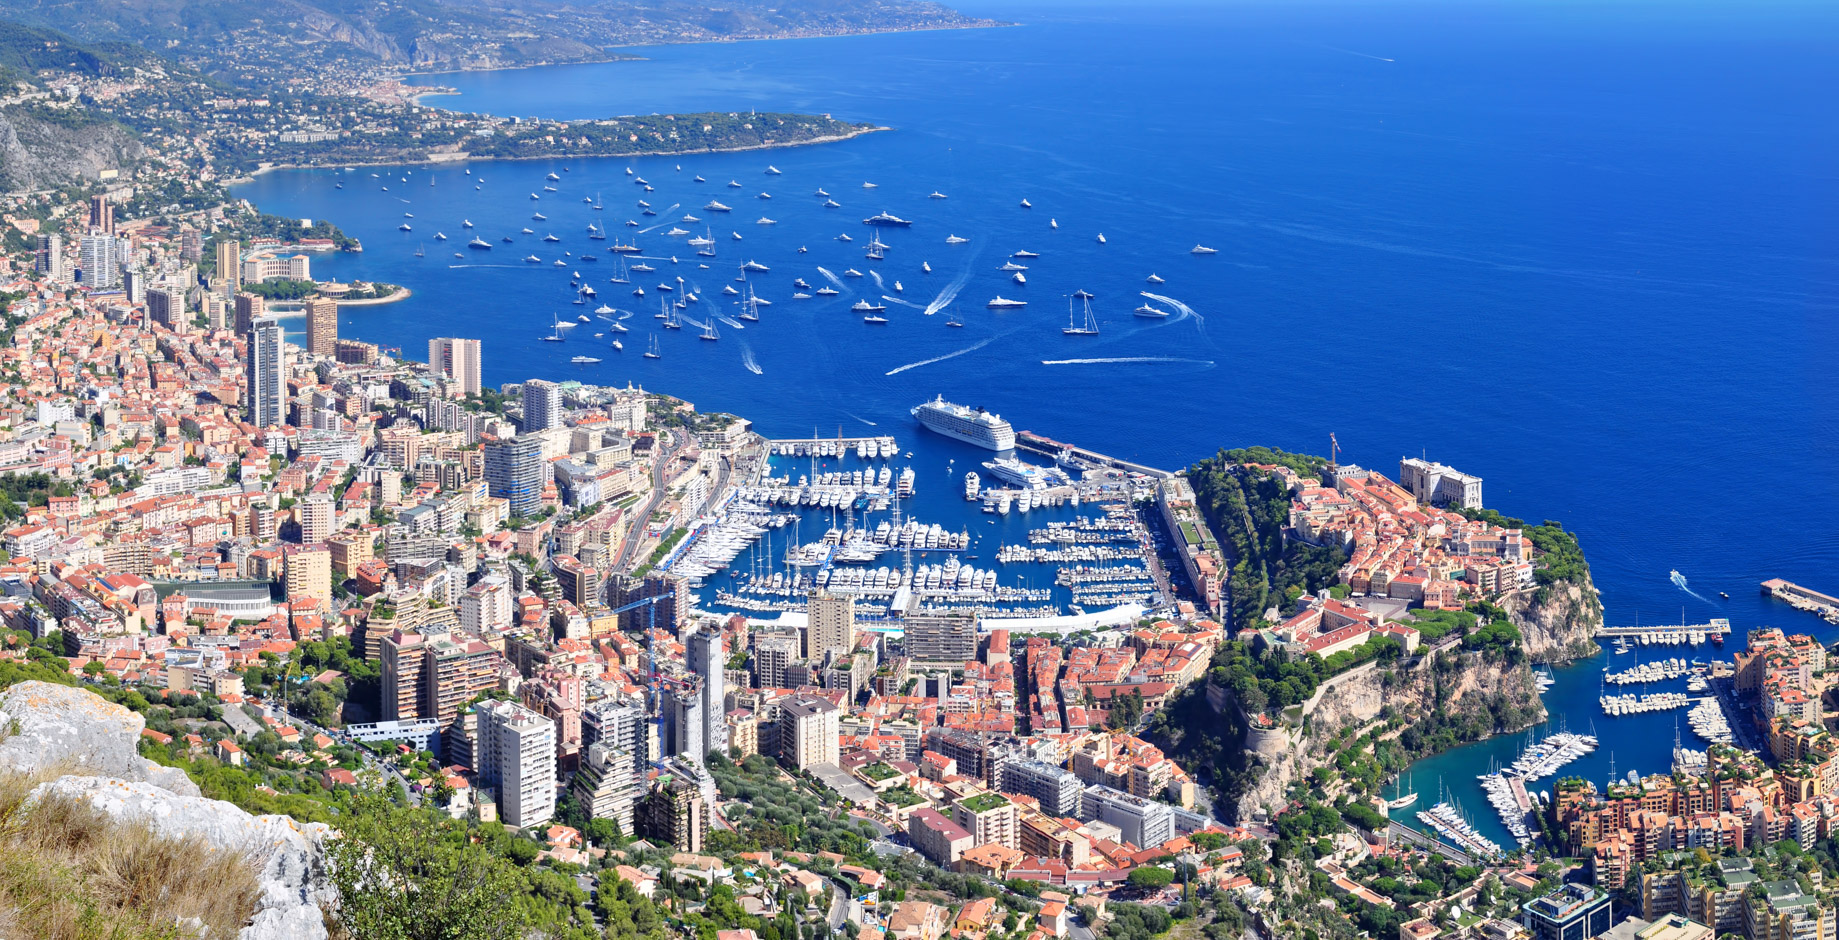 House Hunting in Monaco - Inside One of the Worlds Most Expensive Property Markets